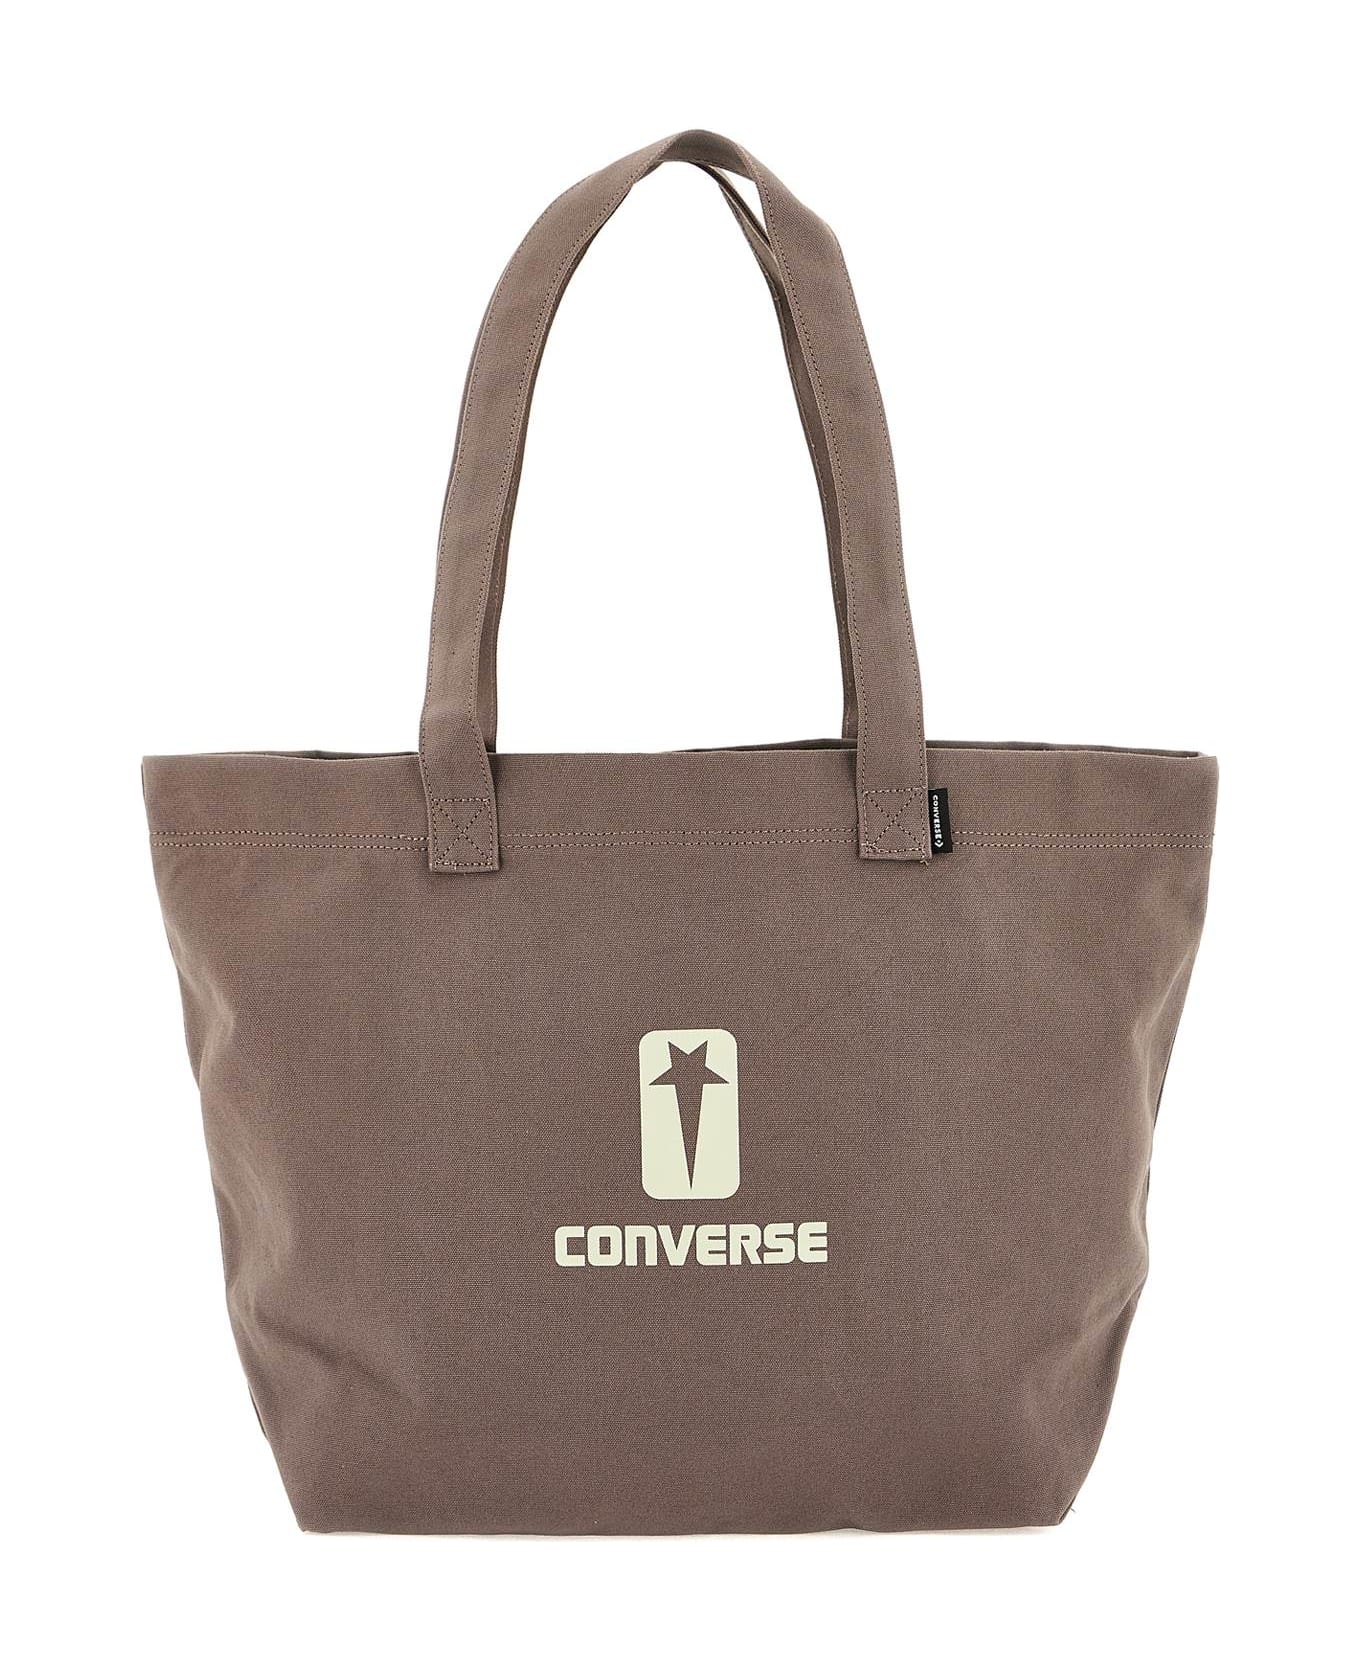 DRKSHDW Cotton Tote Bag - DUST (Grey) トートバッグ